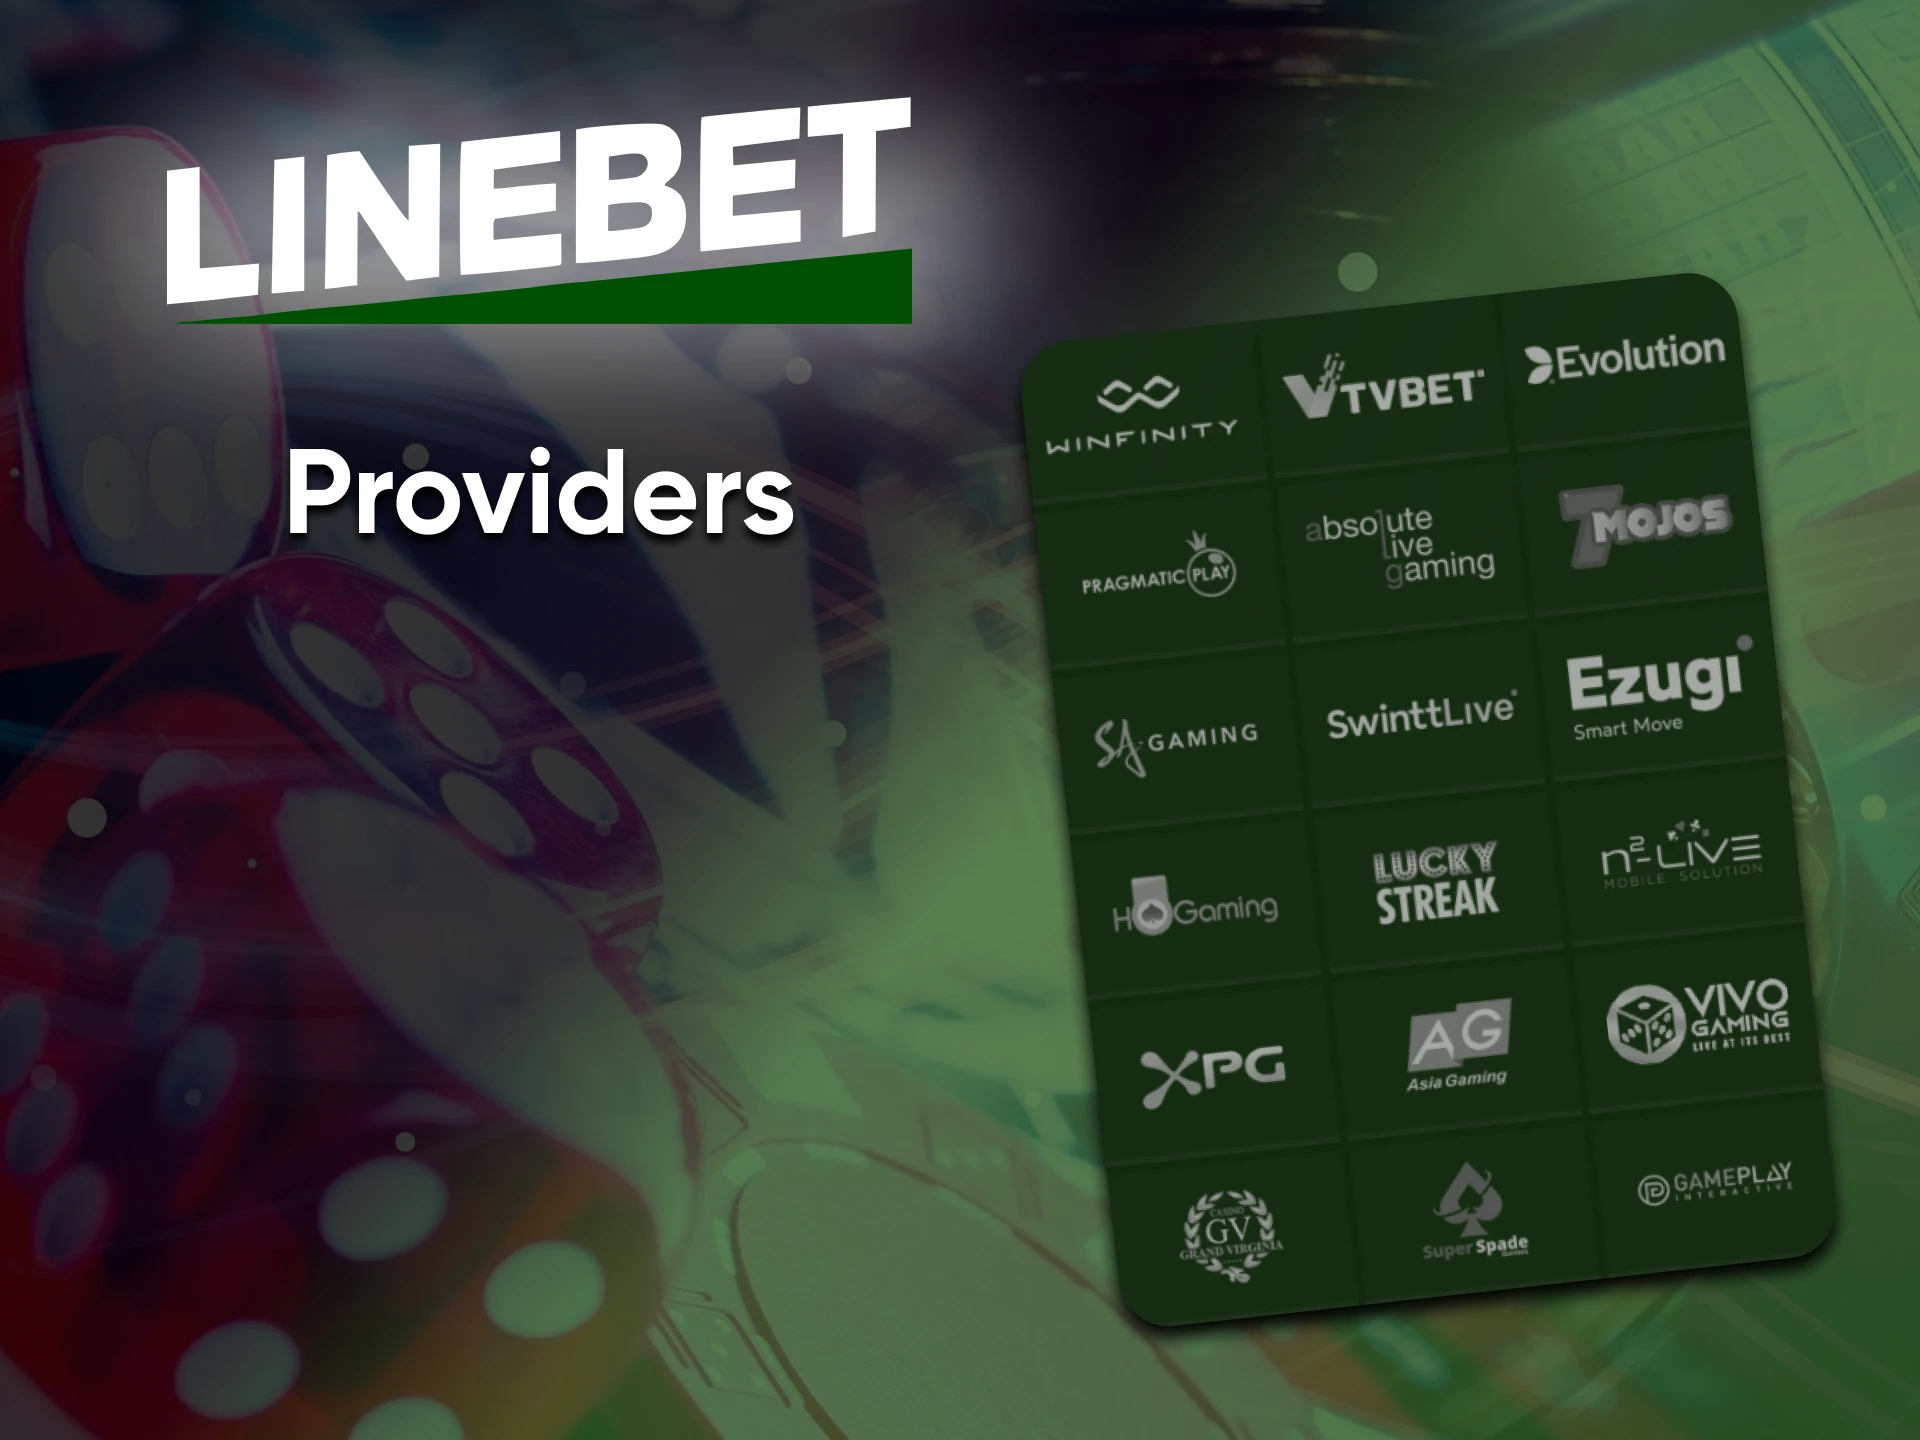 Linebet has a large number of casino game providers.